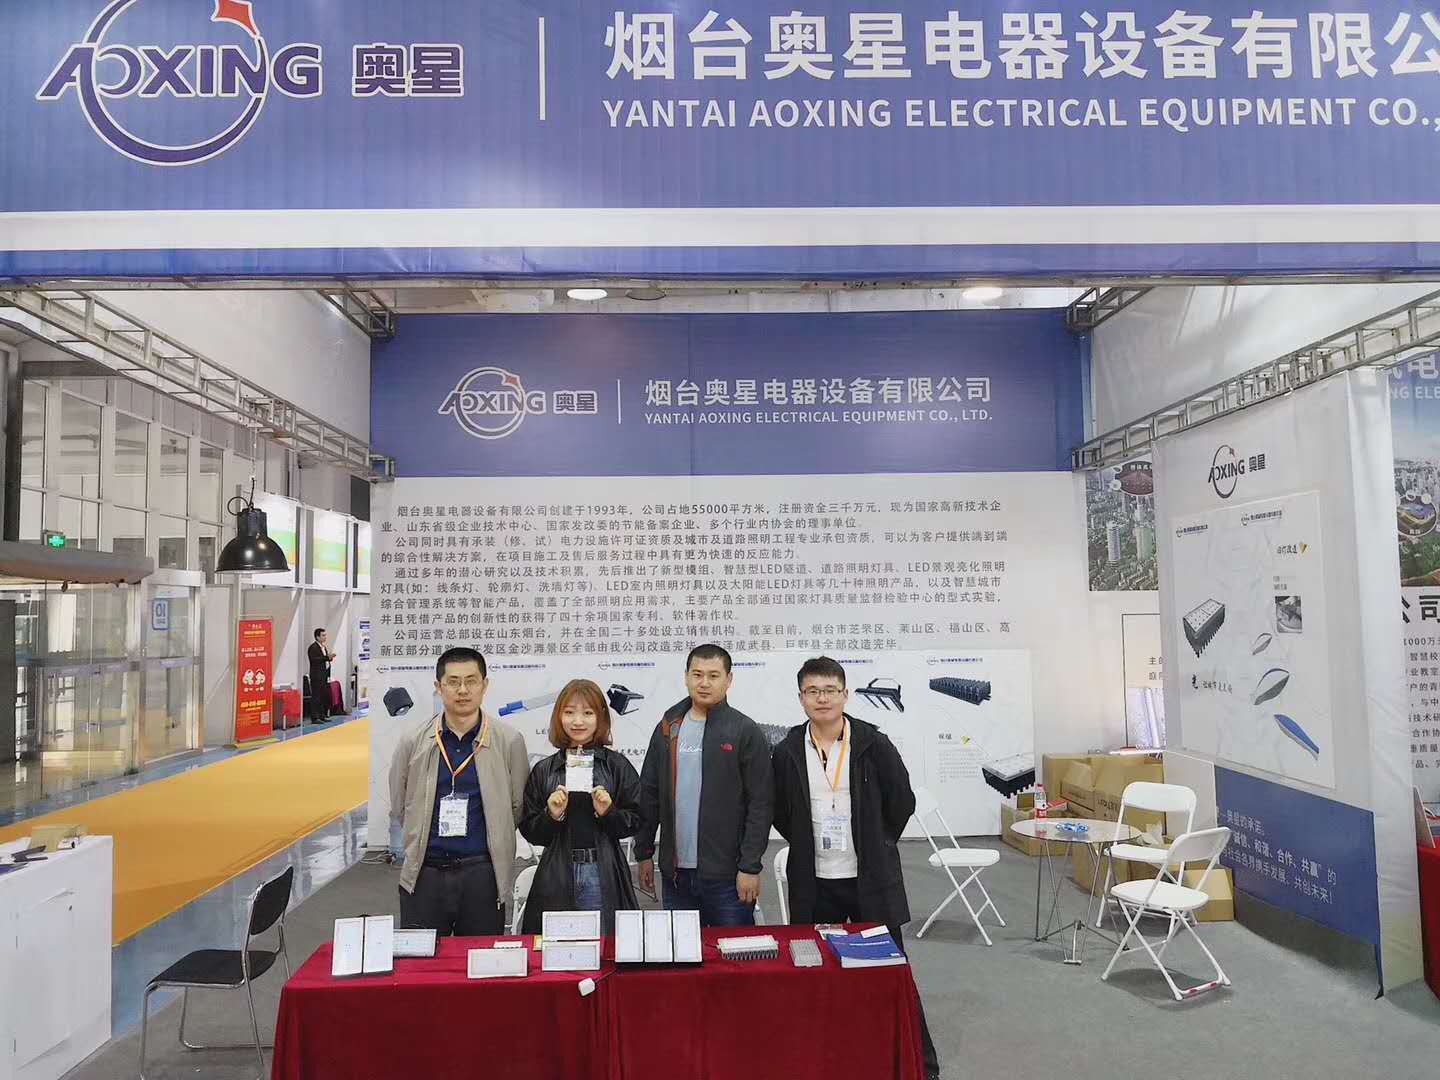 Our company was invited to participate in the first China (Shandong) Semiconductor New Product and New Technology Expo in 2019.